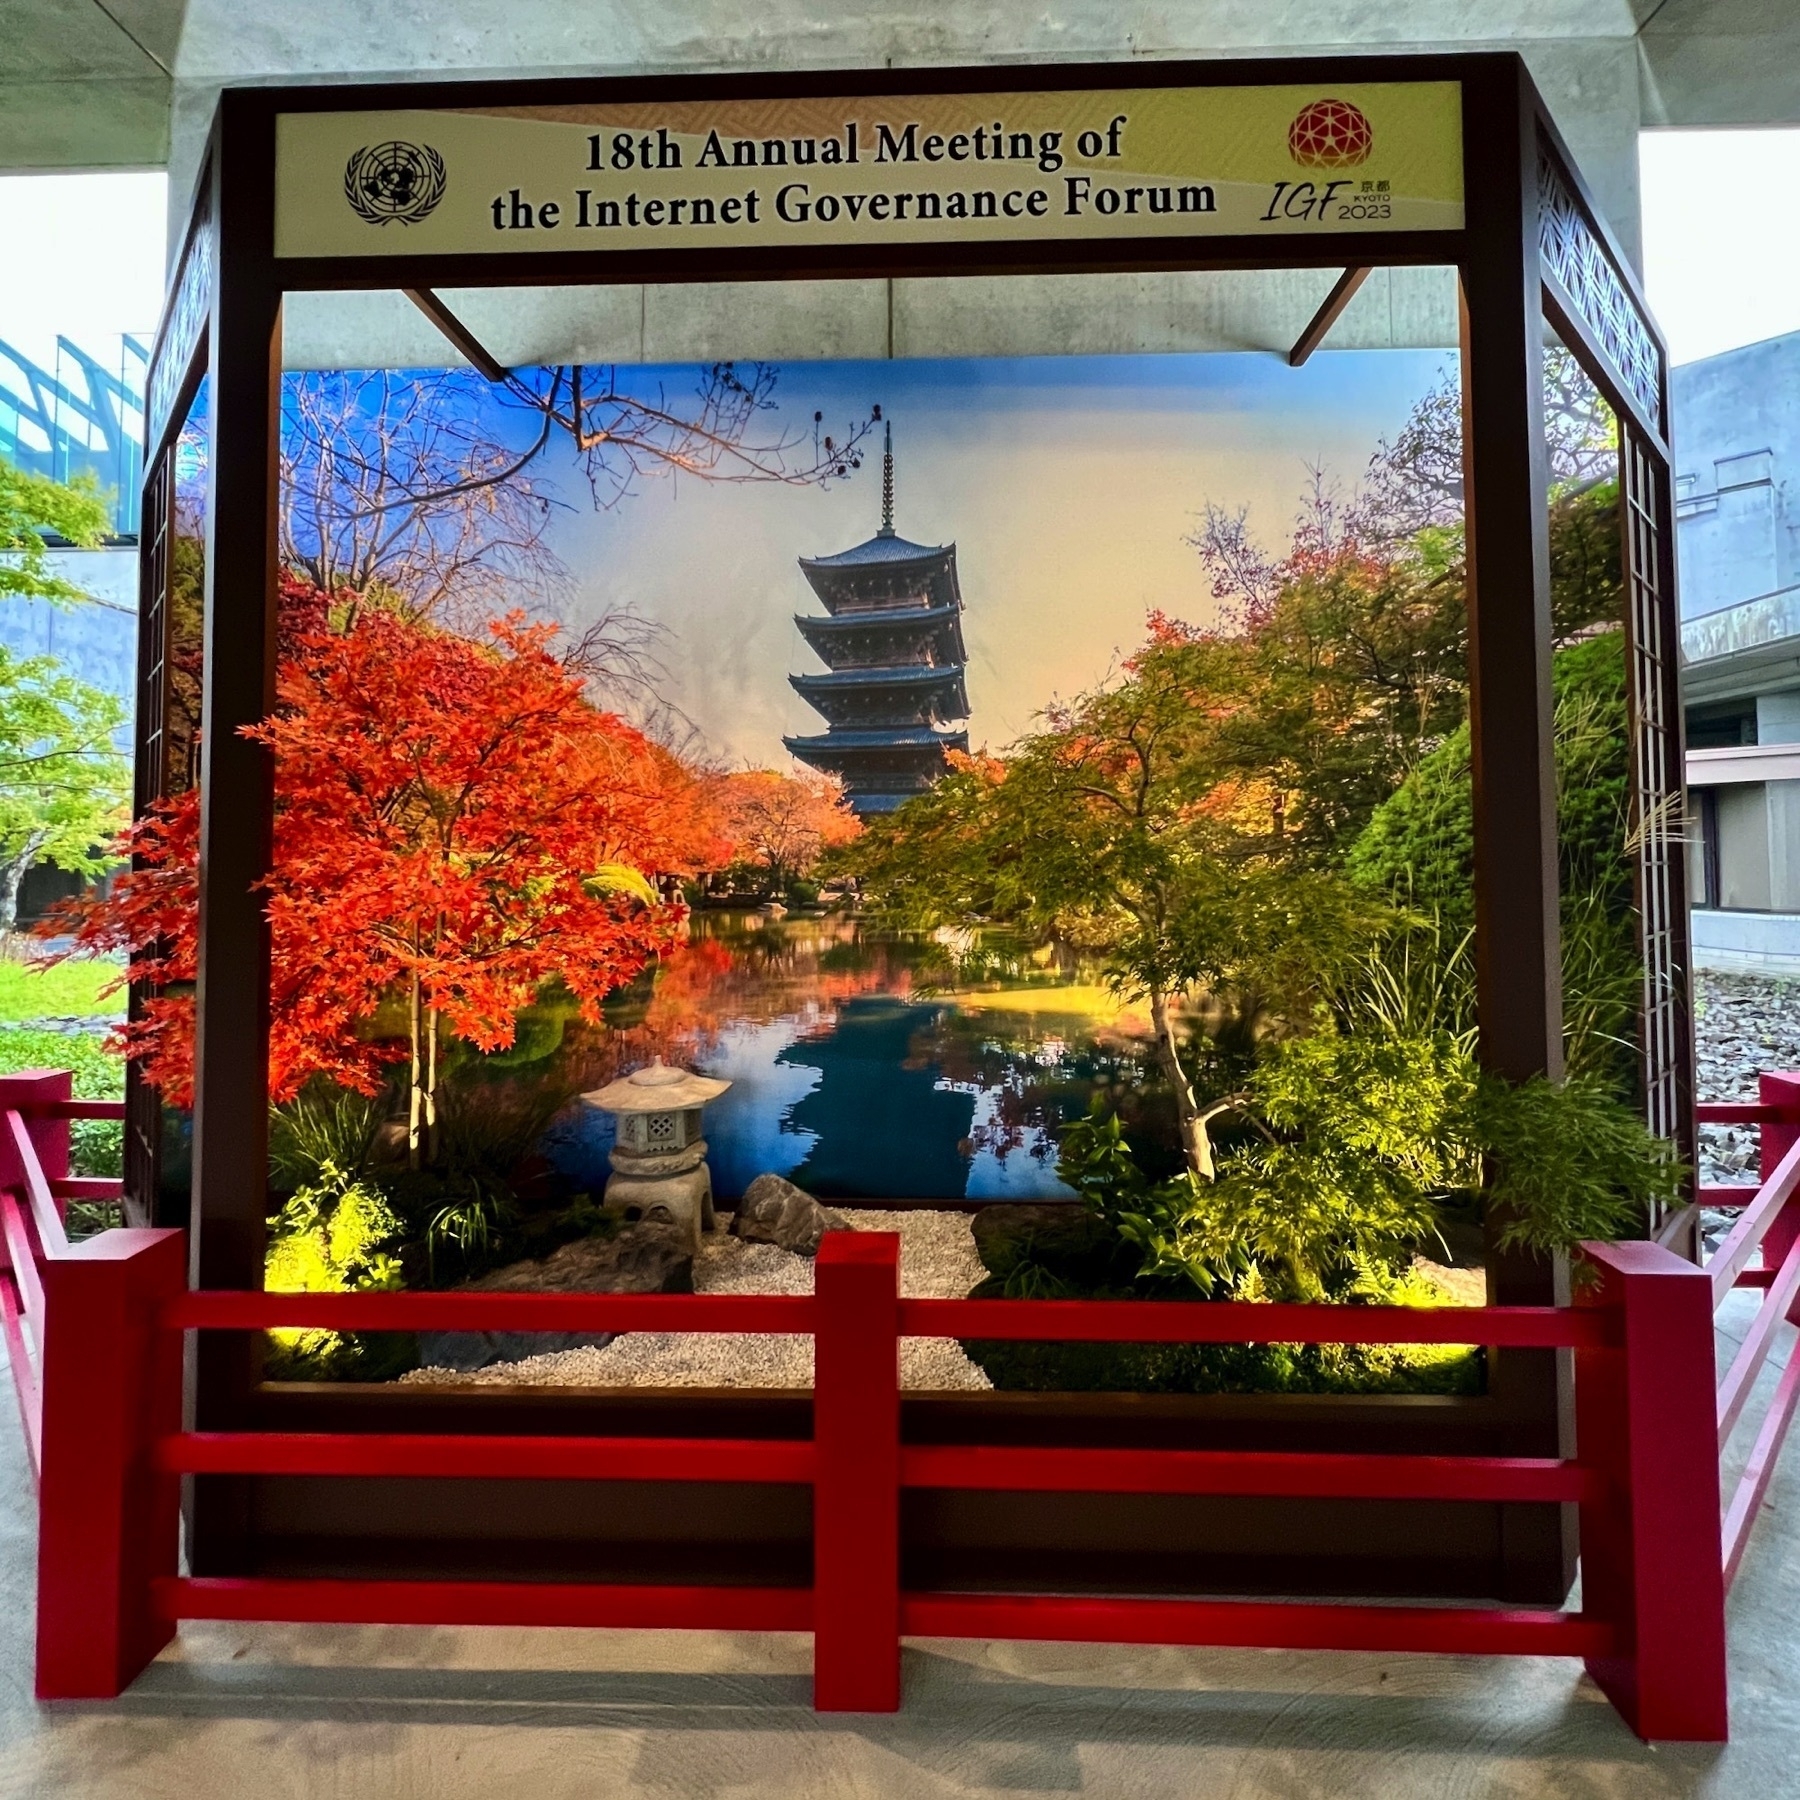 Display with two maple trees, one green and one turned red with the season. In the background is a picture of the Toji pagoda, above is a sign for the 18th Annual Meeting of the Internet Governance Forum.